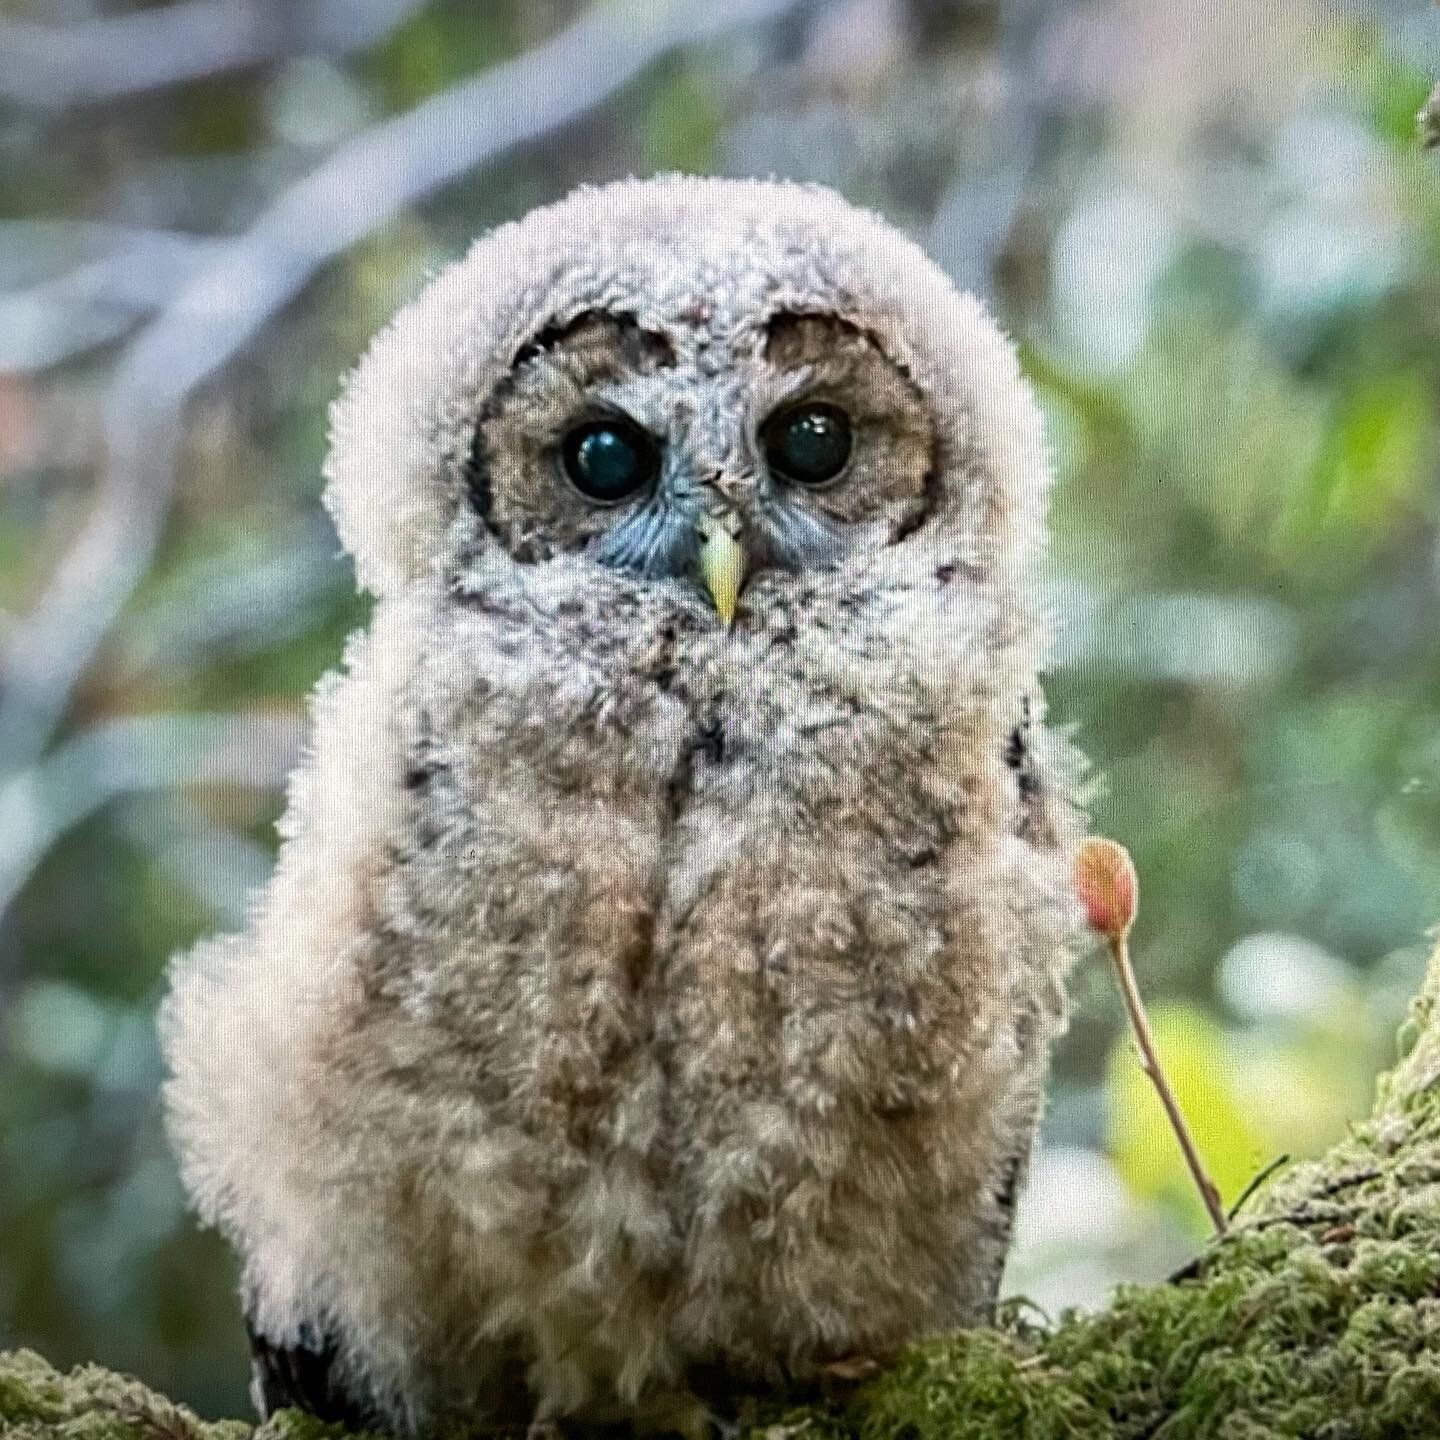 Redwood tree habitat for endangered species, like the Northern Spotted Owl, is being destroyed in Sonoma county.  Help us protect the forest. #stopthp #russianriver #protecttheclartree #guerneville